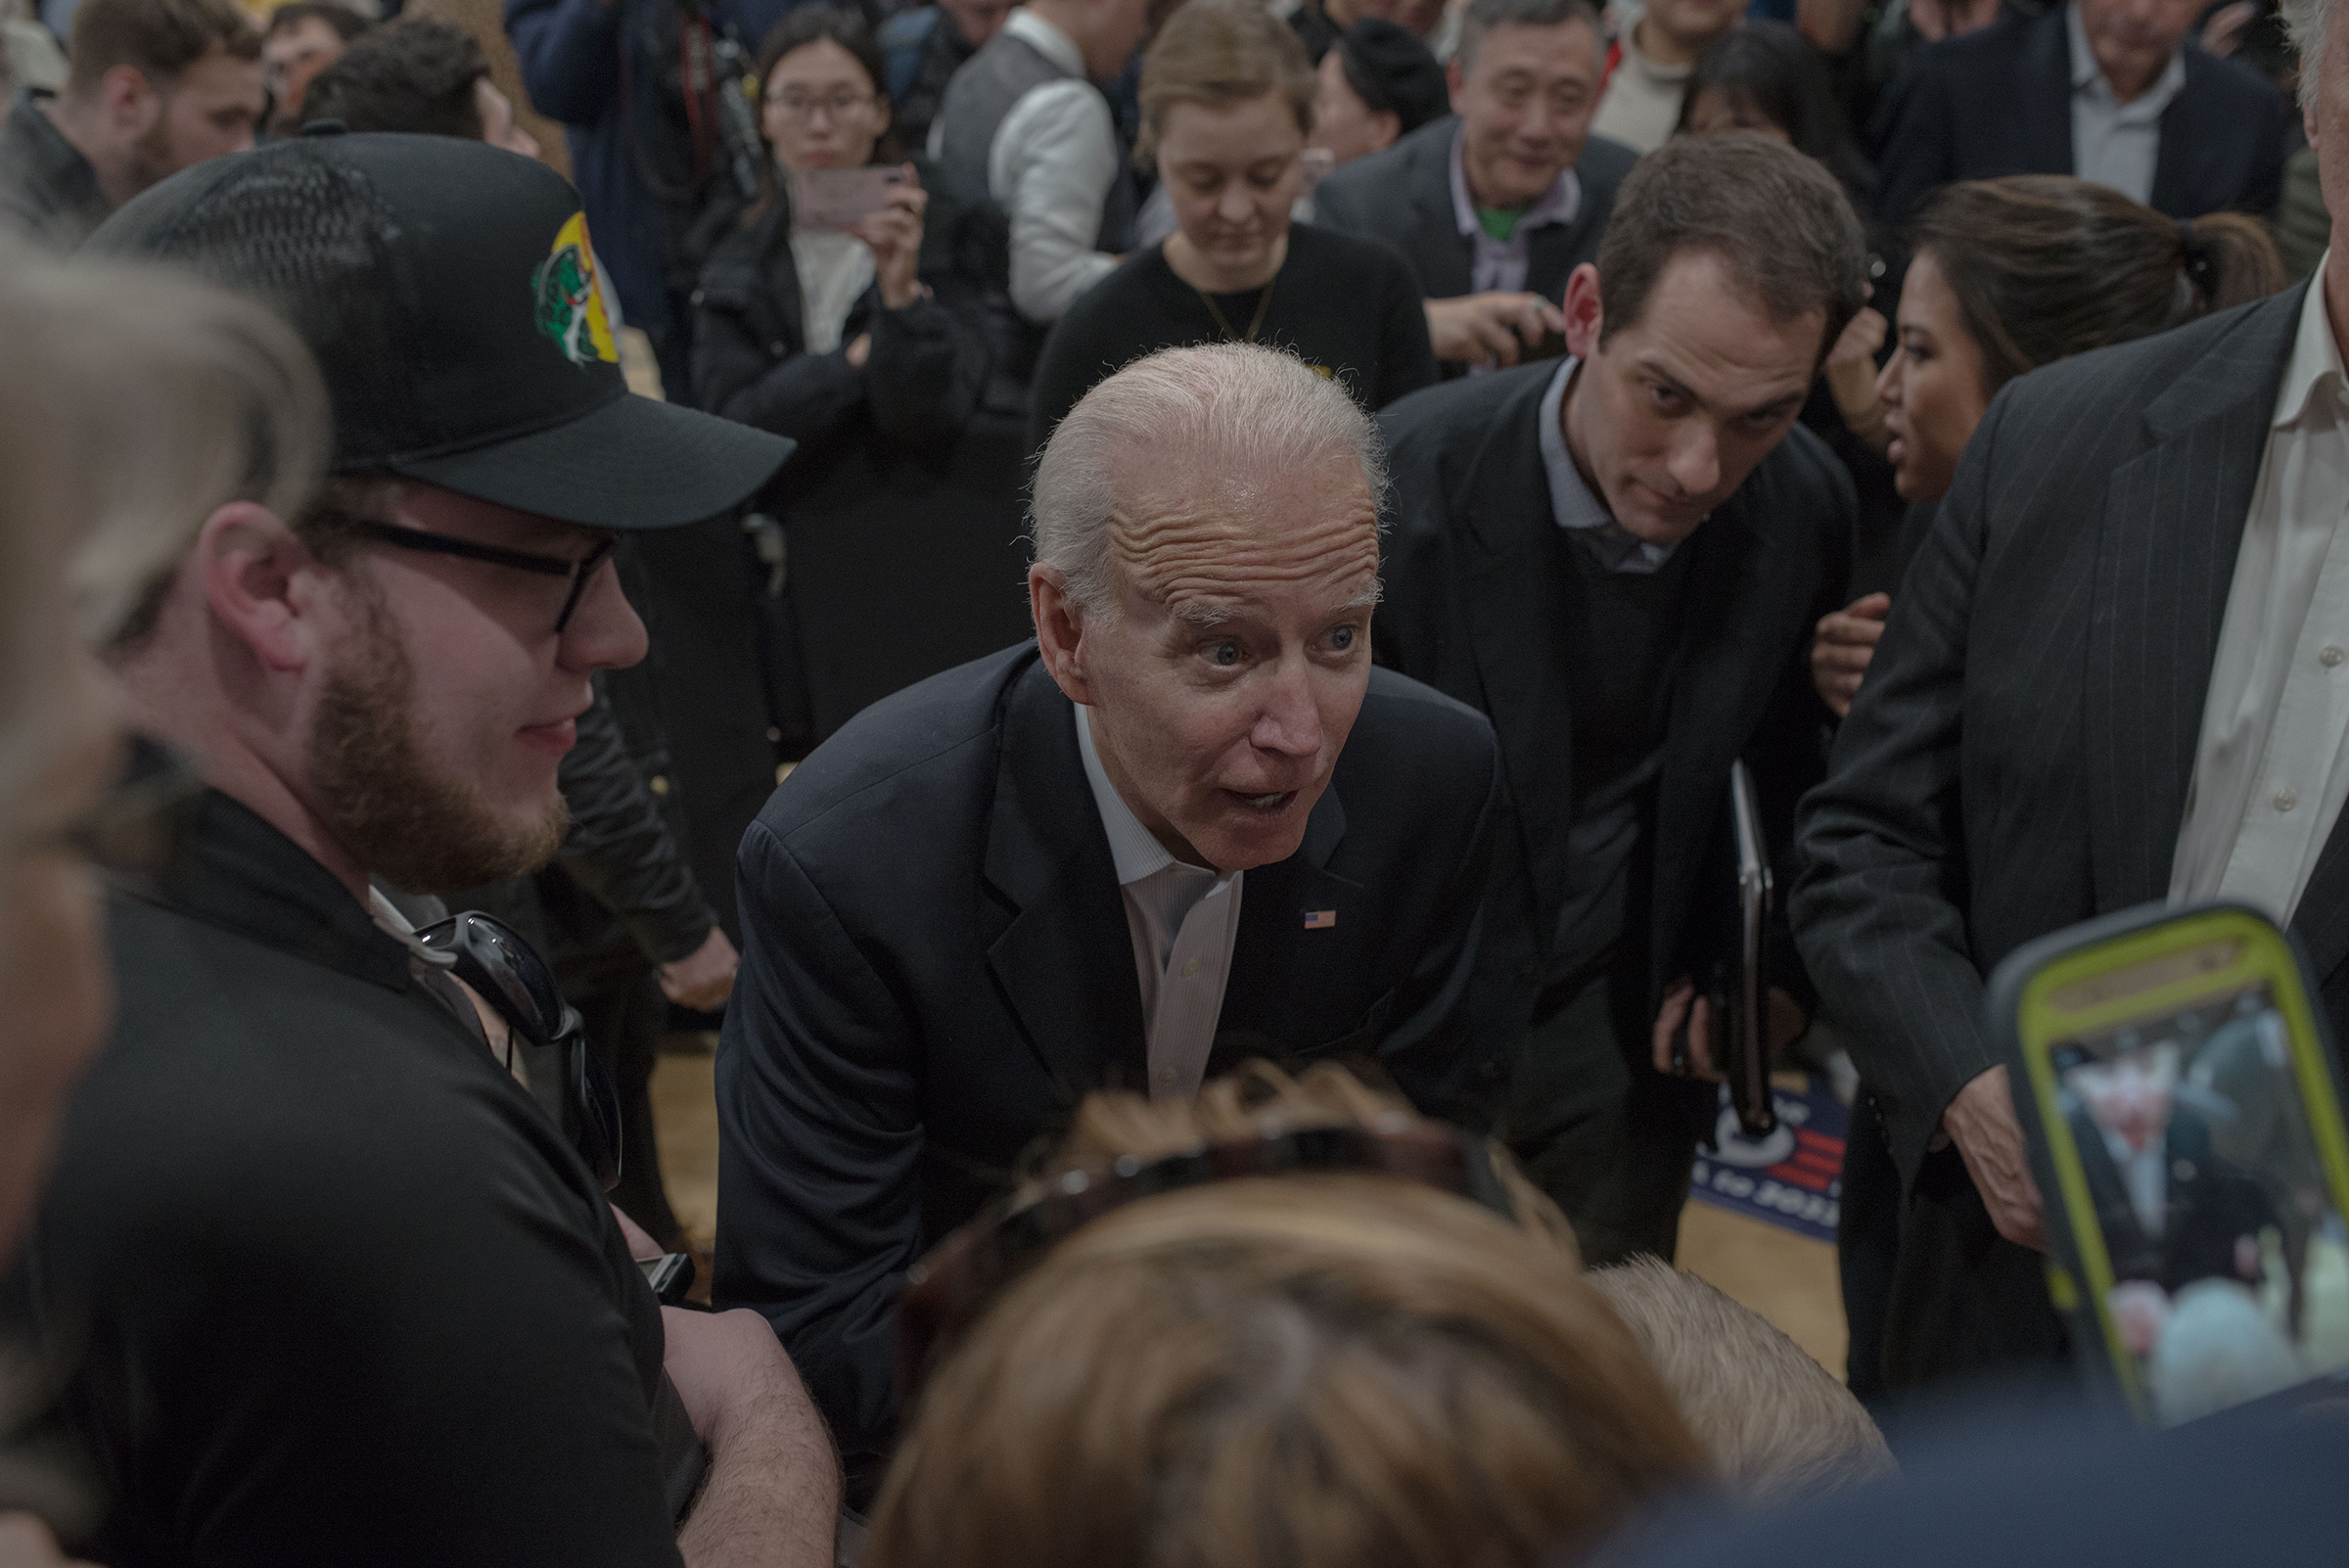 Biden at a town hall in Des Moines on Feb. 2 (Photograph by September Dawn Bottoms for TIME)